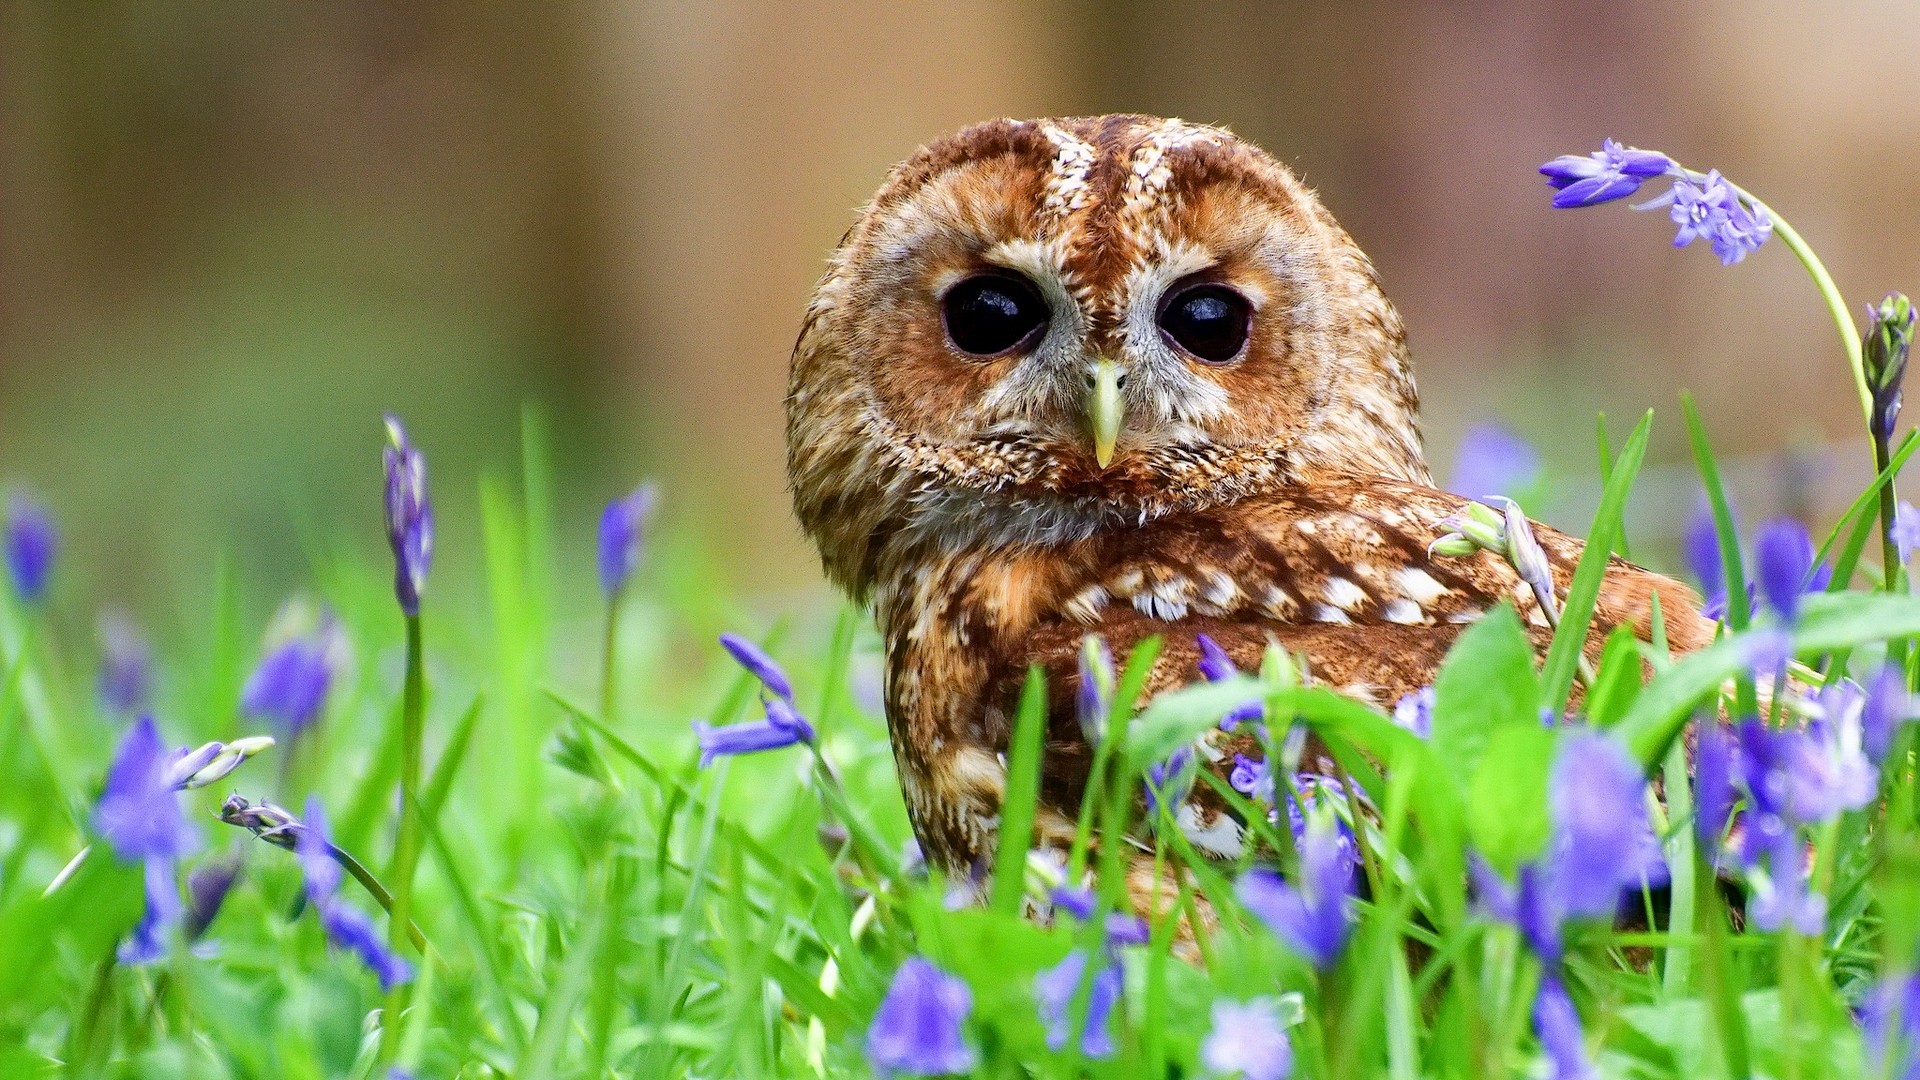 Cute Owl Image Download Free.